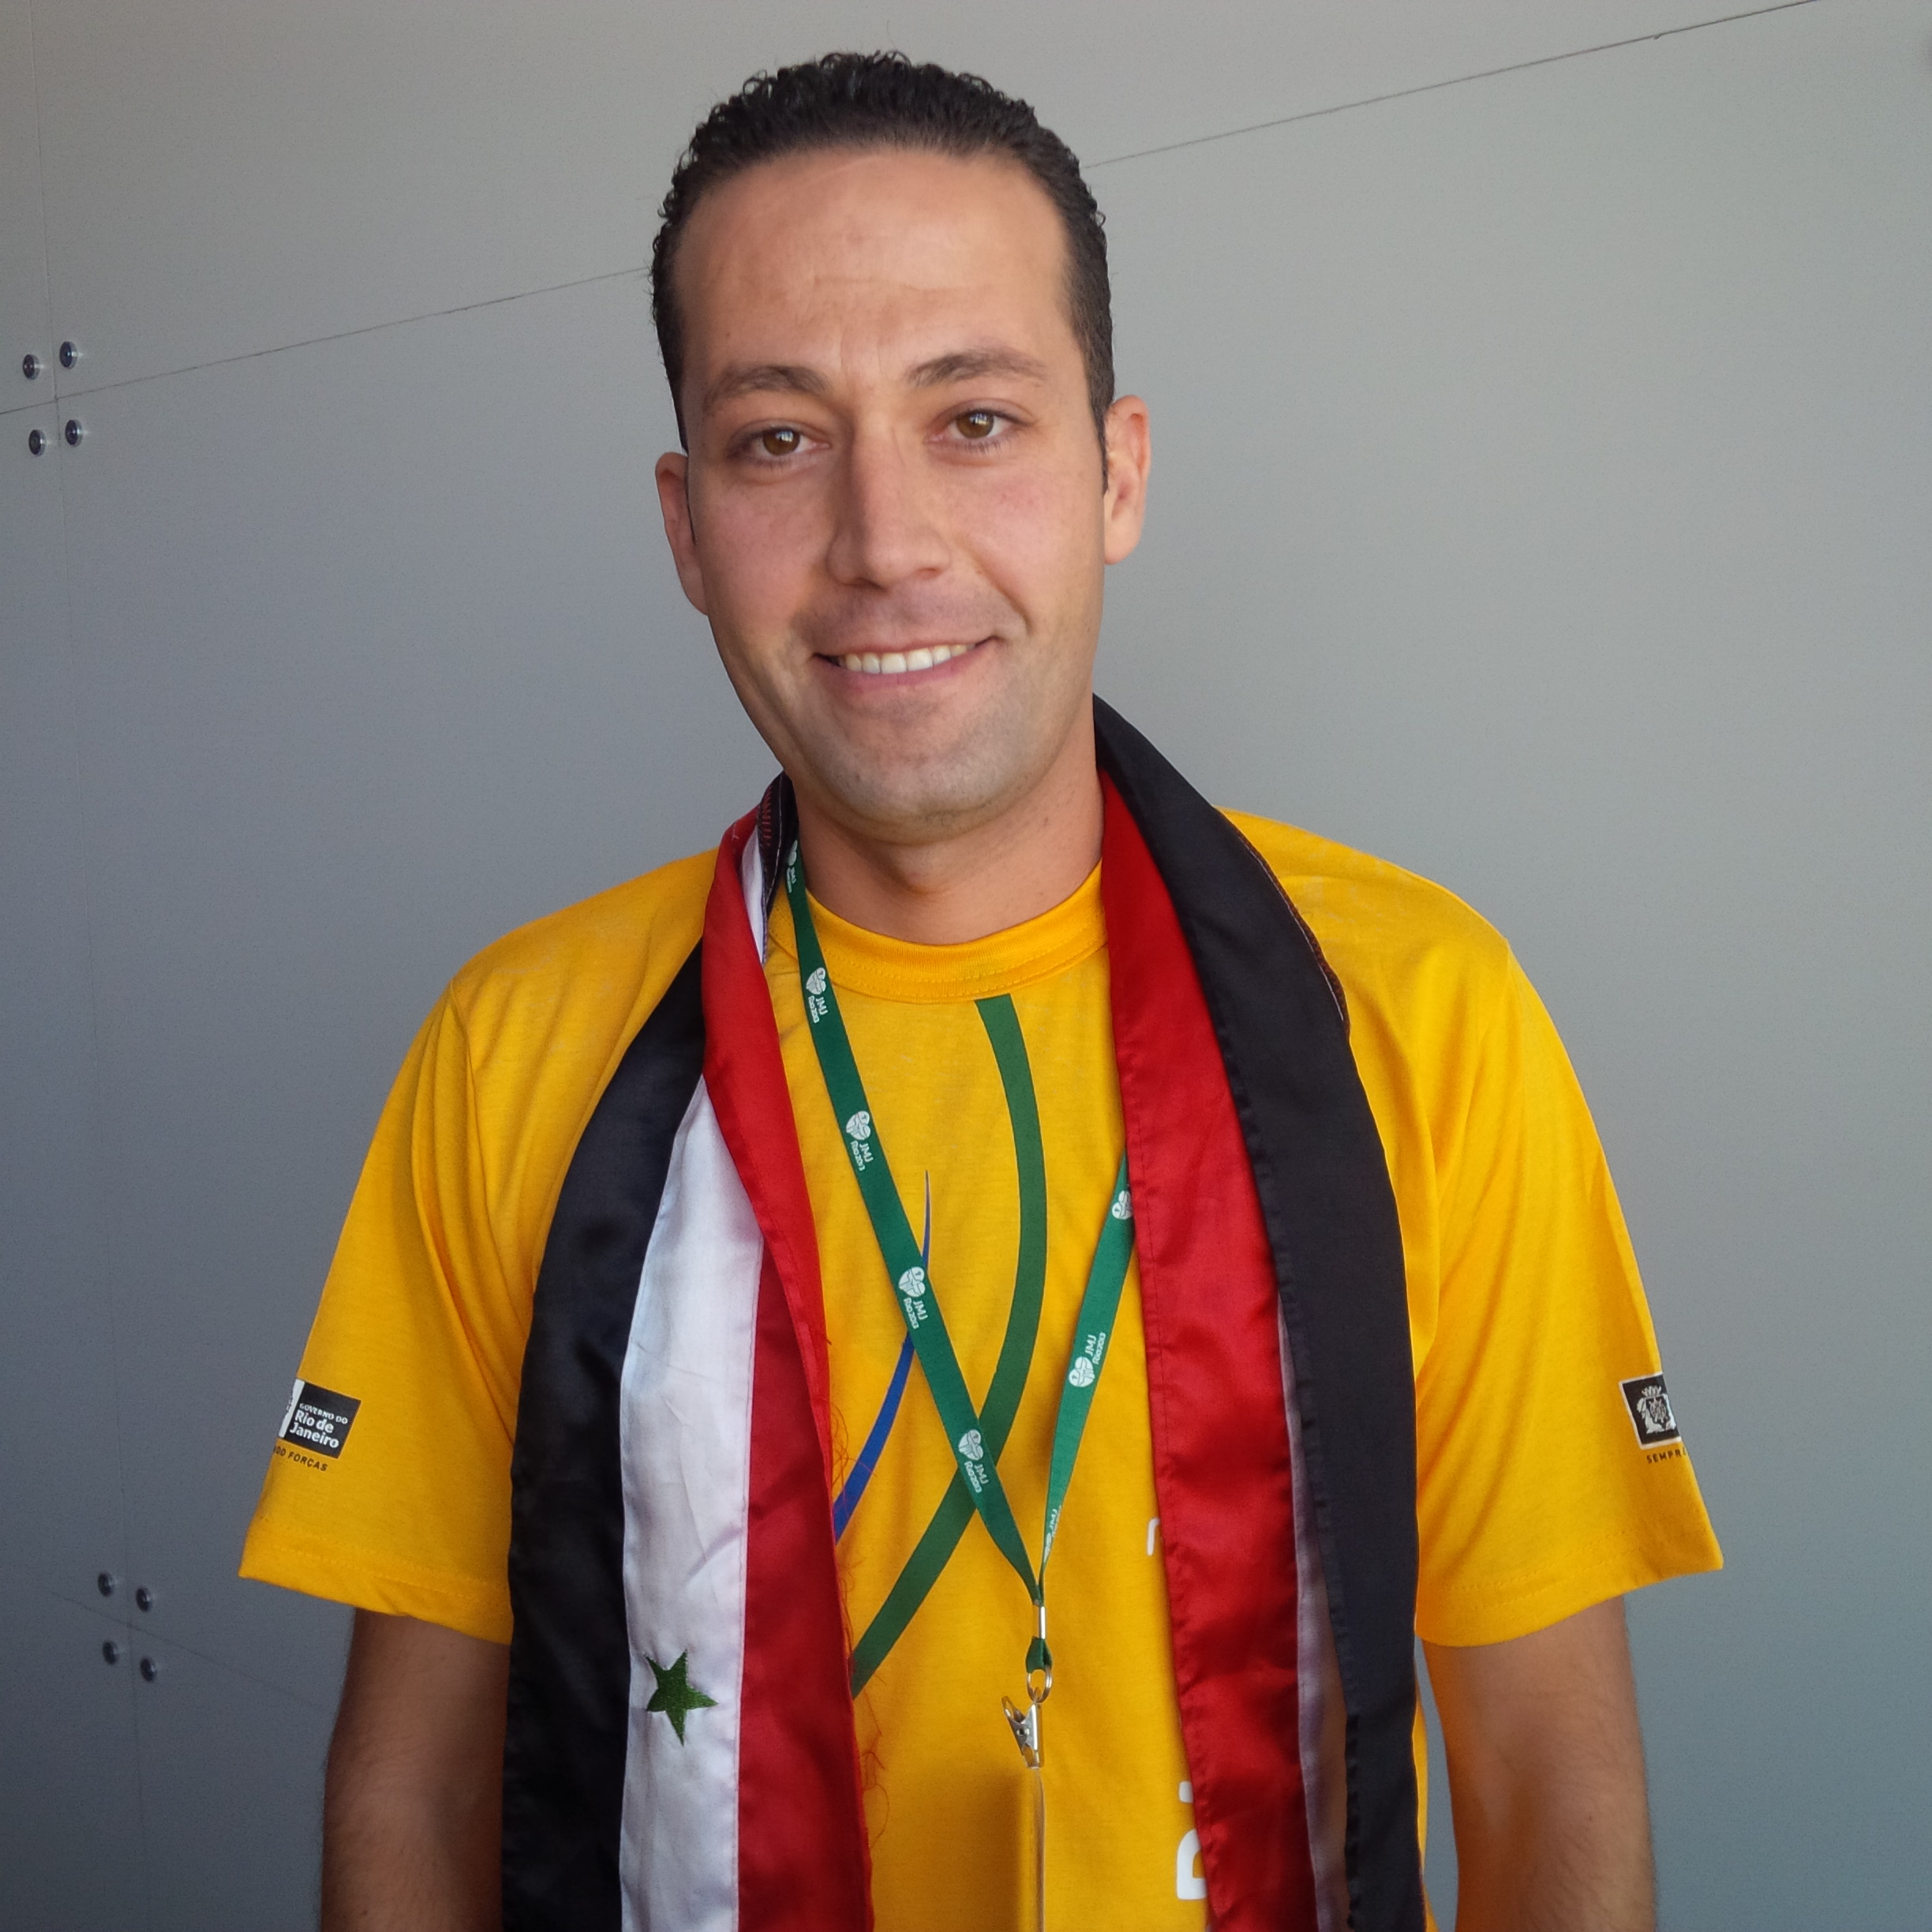 Bashar Khoury, 29, a Syrian volunteer at the Rio World Youth Day